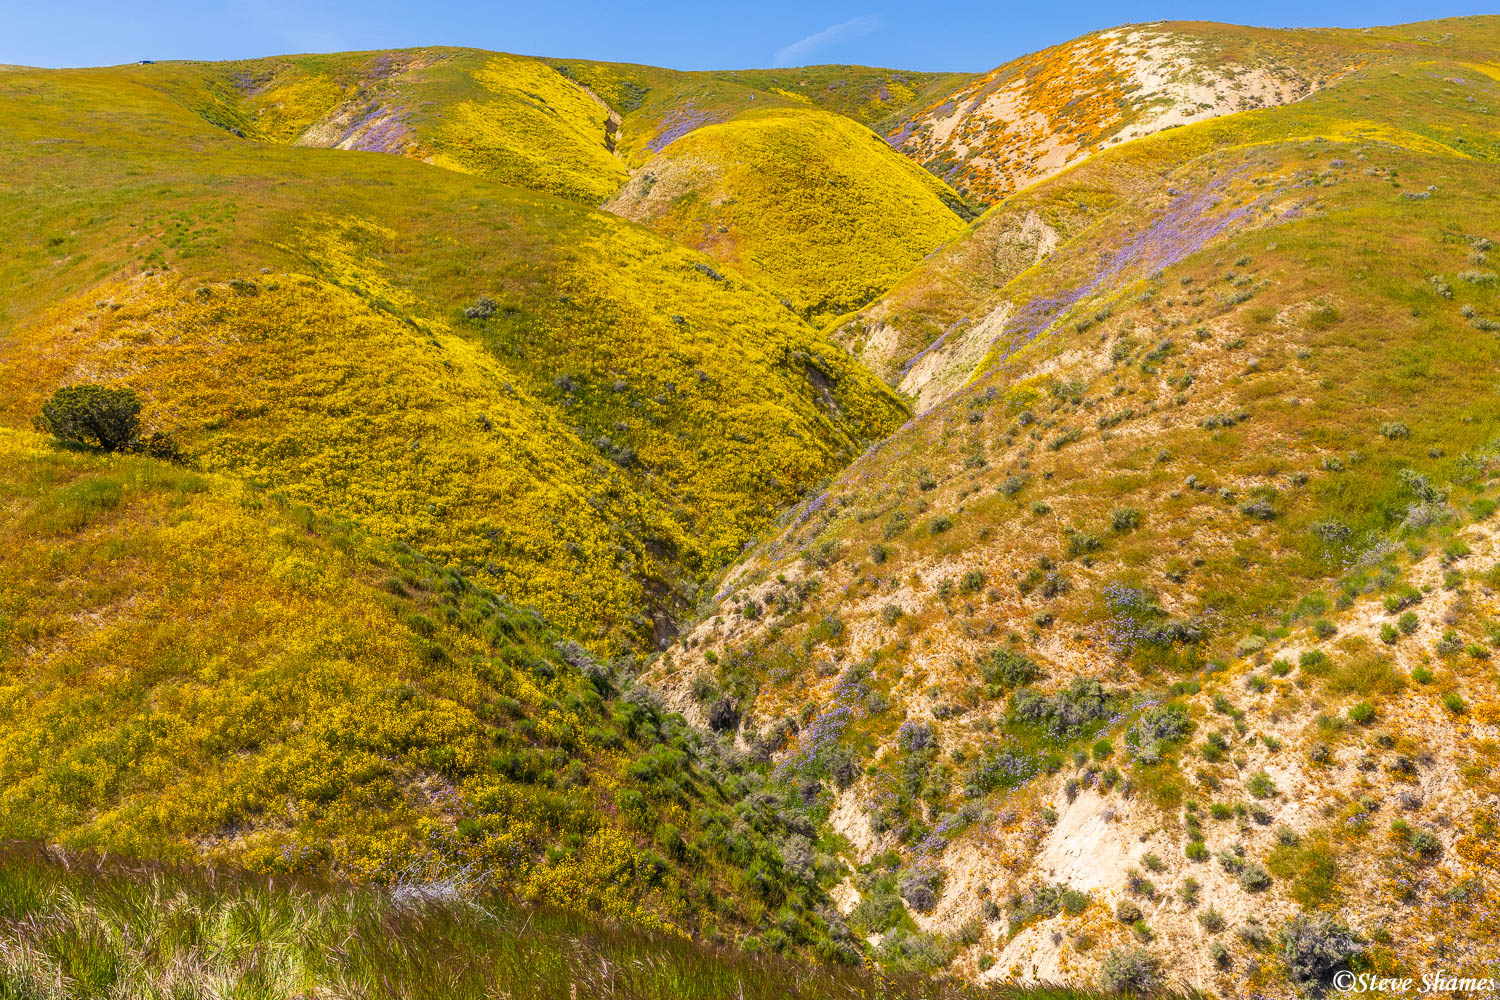 Here are some colorful Carrizo hills, close to the south entrance.